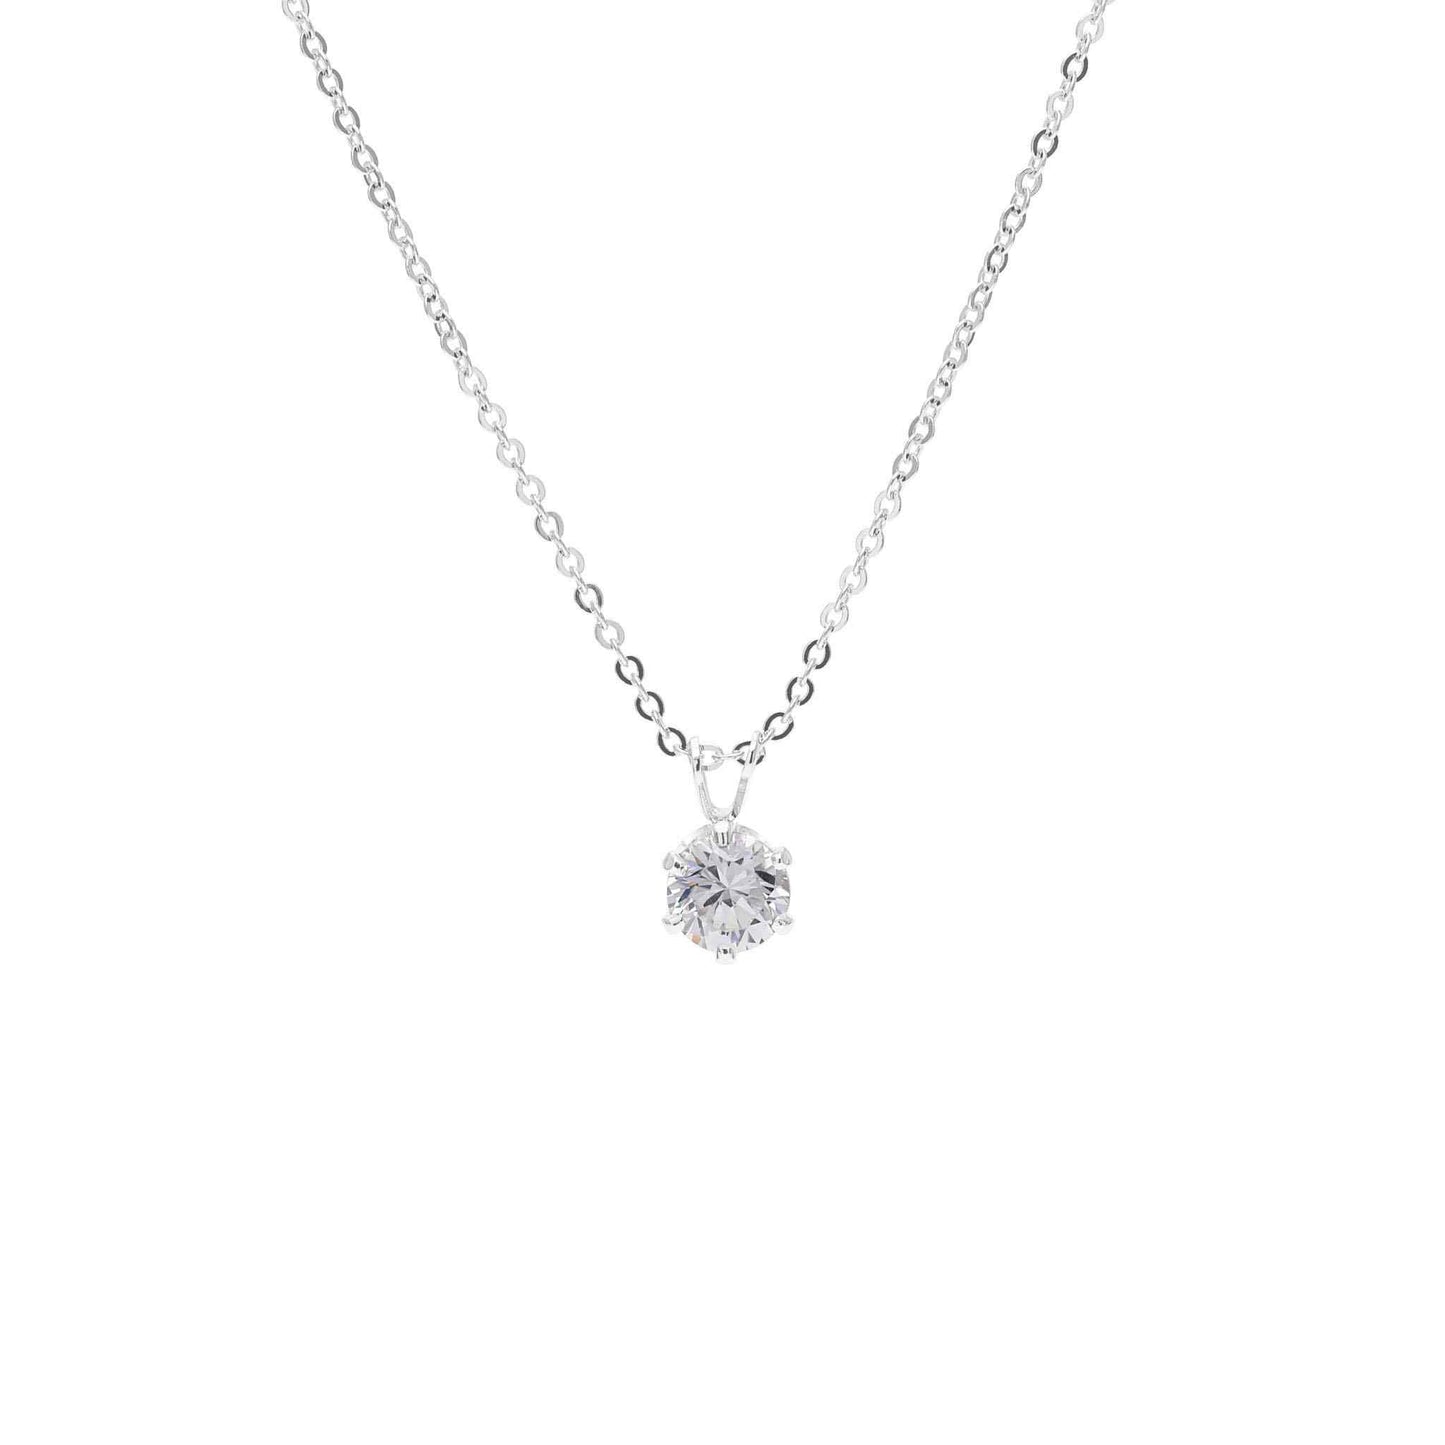 A 7mm x 5mm round simulated diamond necklace displayed on a neutral white background.